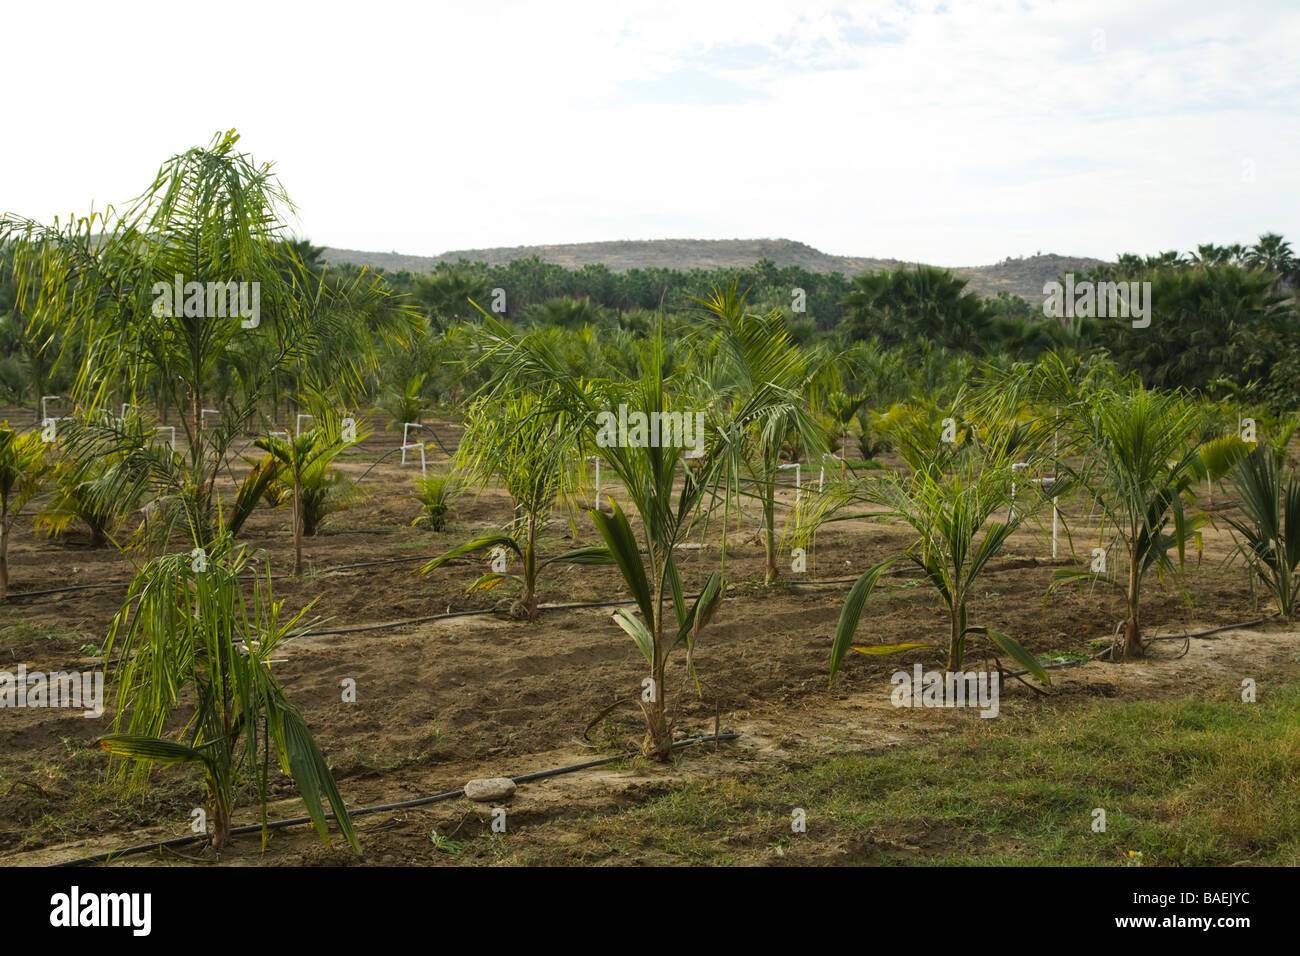 MEXICO Todos Santos Rows of irrigated palm trees growing in plant nursery field Sierra Laguna mountains in distance Stock Photo